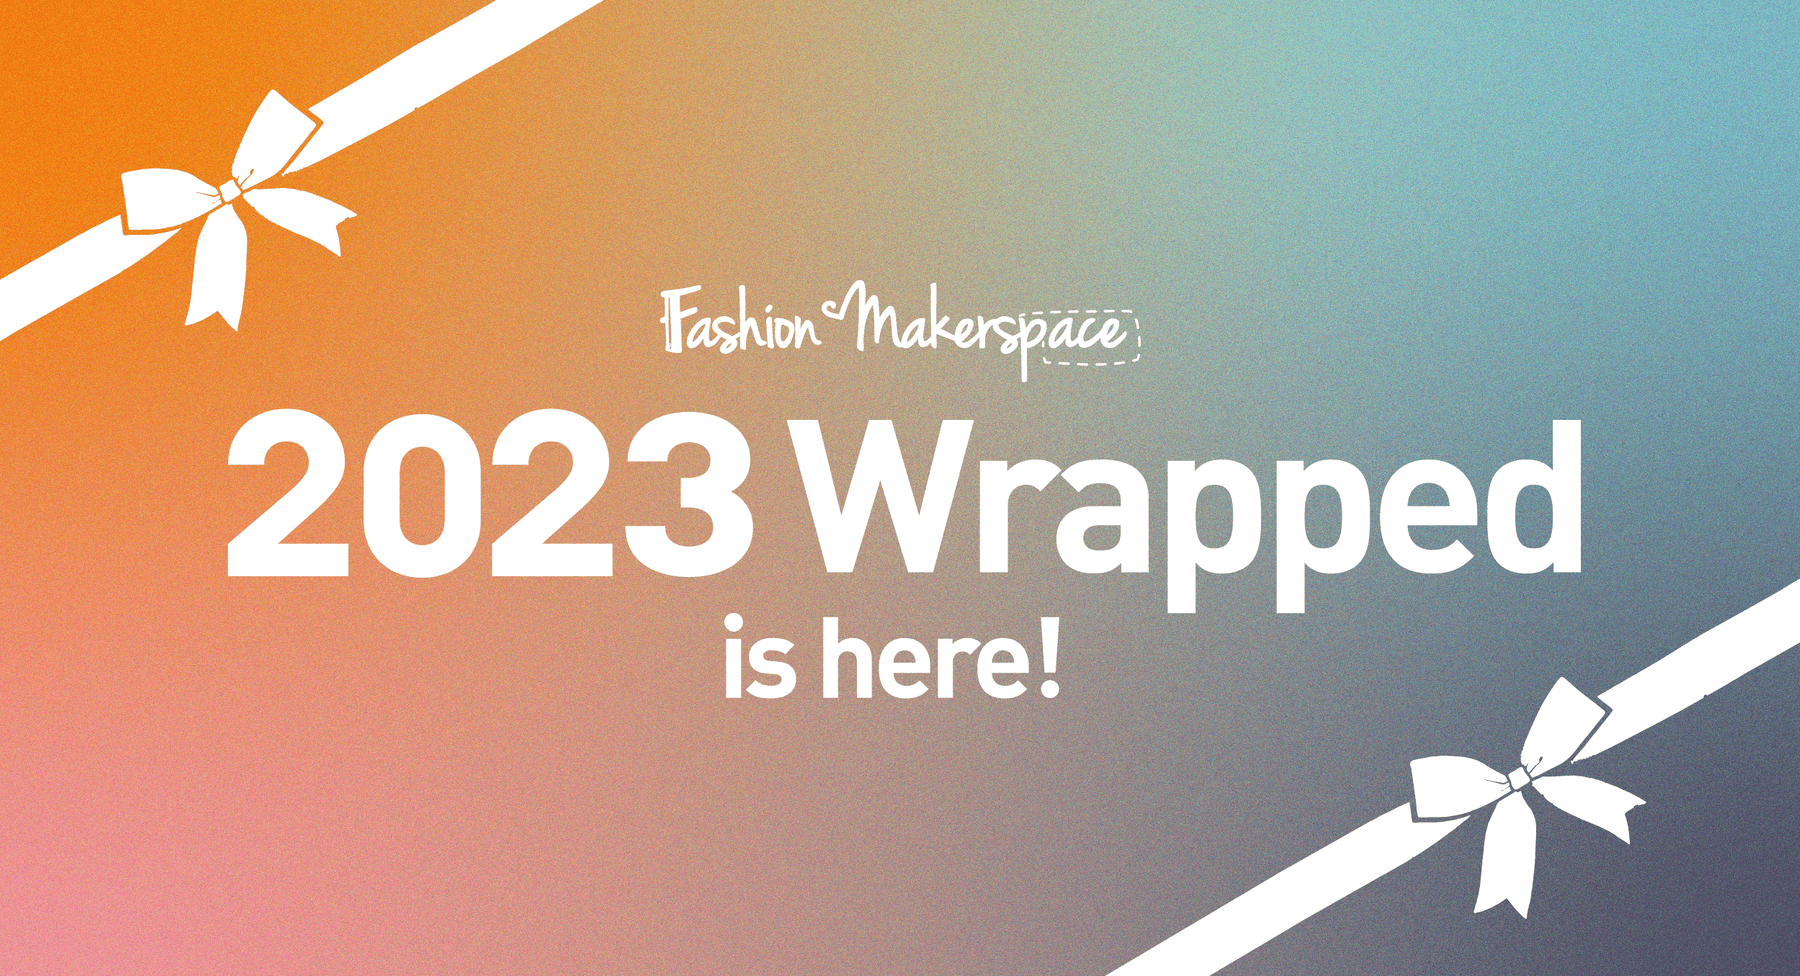 Fashion Makerspace 2023 Wrapped!